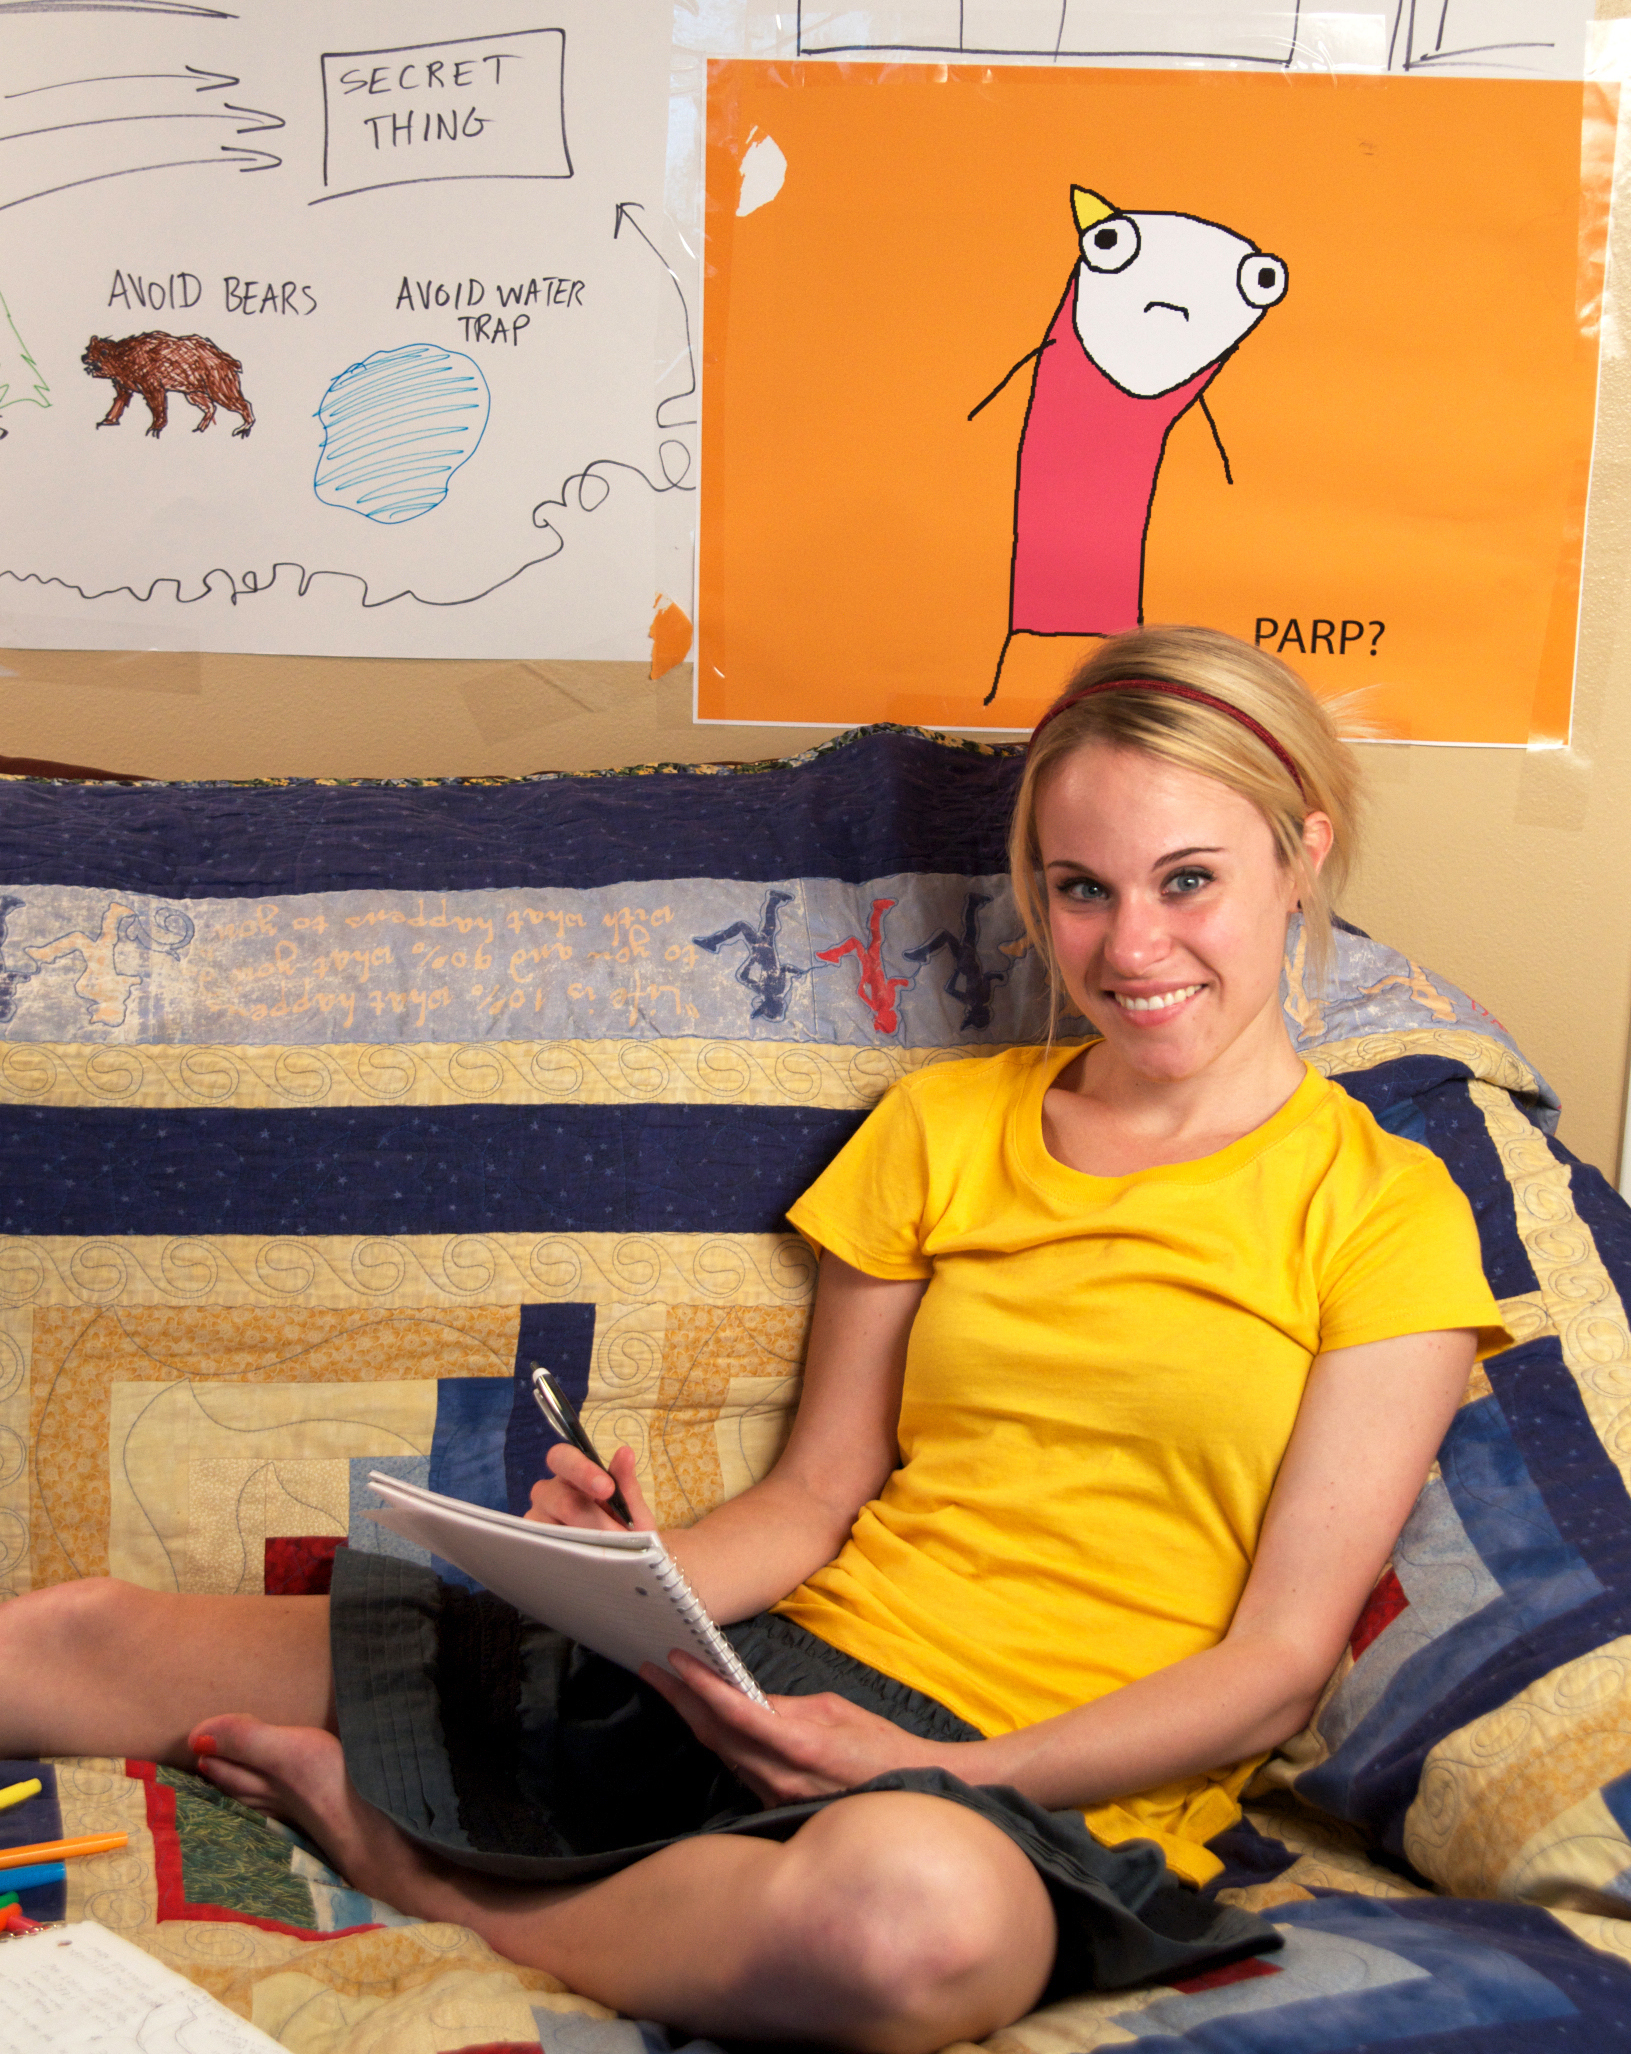 Hyperbole and a Half is Allie Brosh's first book. In it, as on her blog, she draws herself with a tube body and a yellow, triangle ponytail.